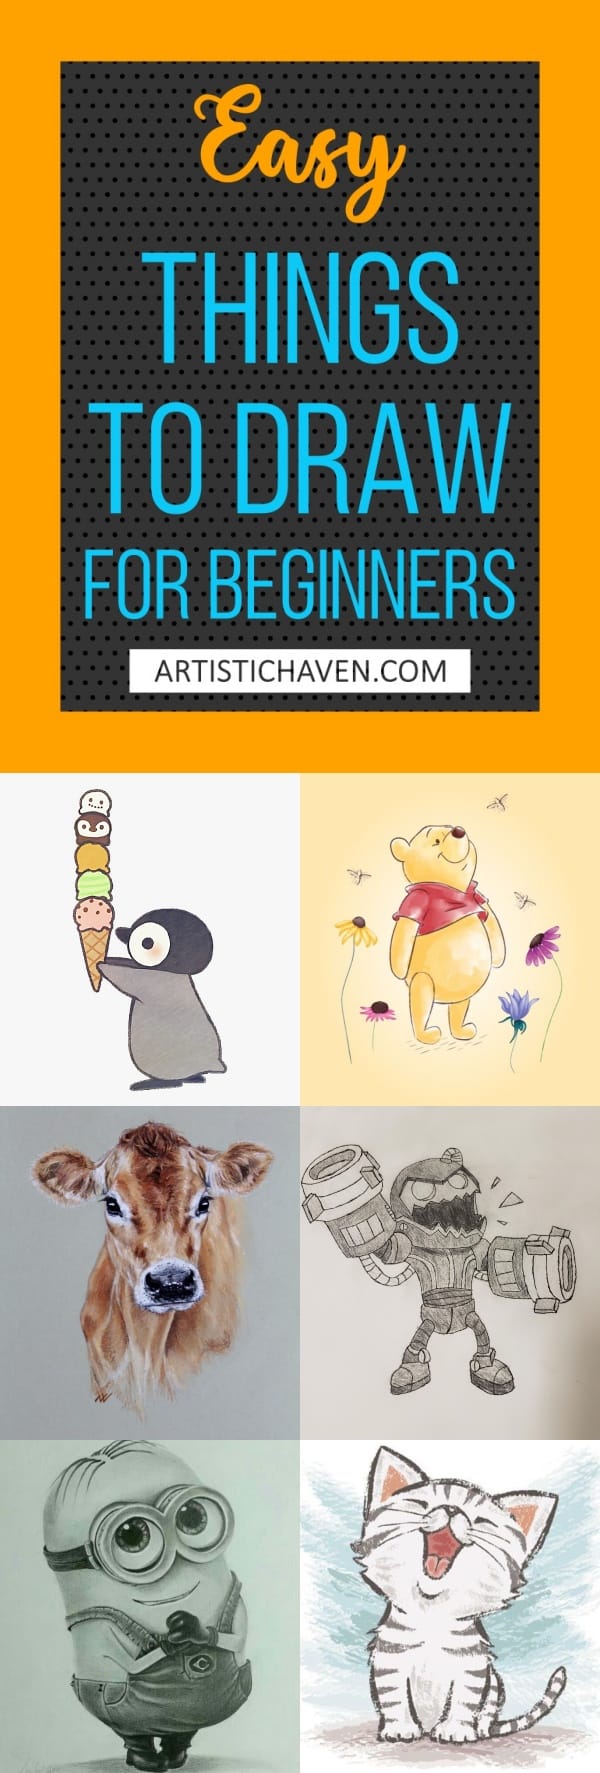 Easy Things To Draw For Beginners